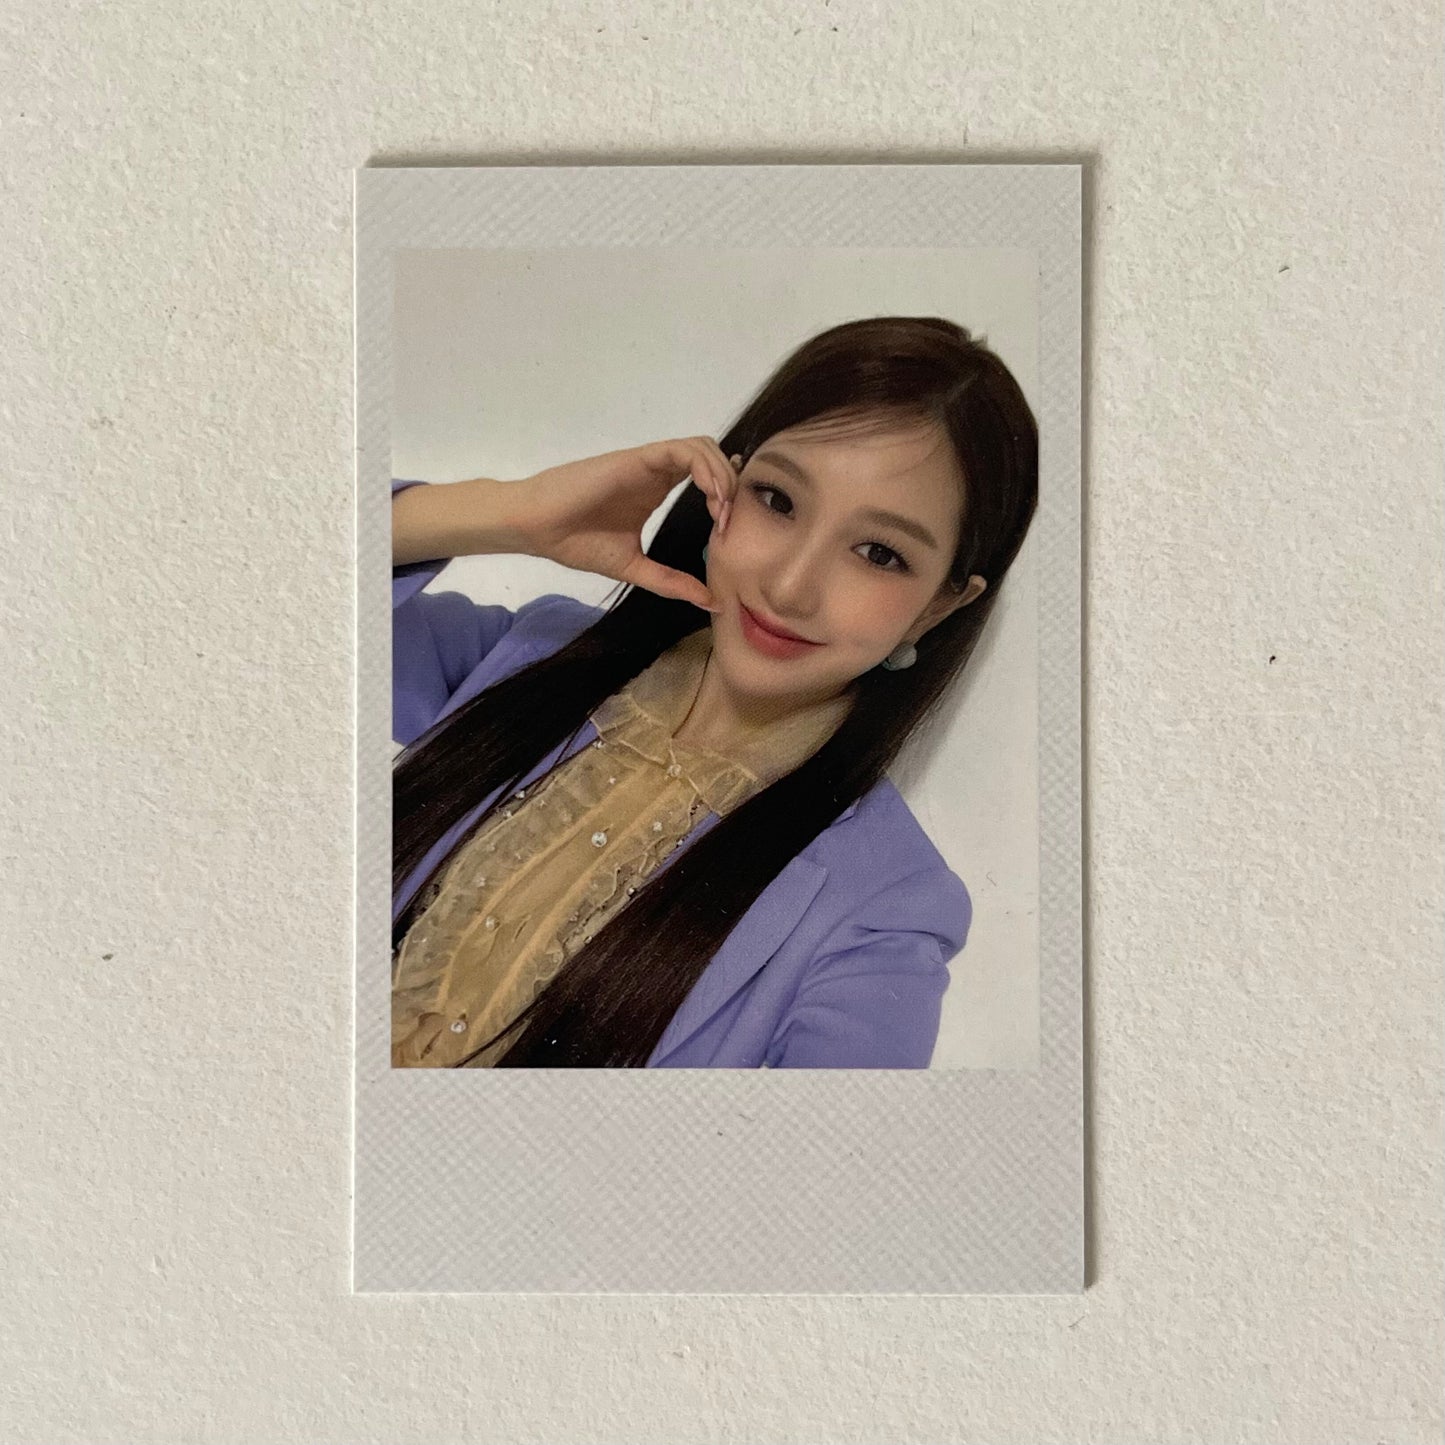 FROMIS_9 - FROM OUR MEMENTO BOX, MusicKorea POBs